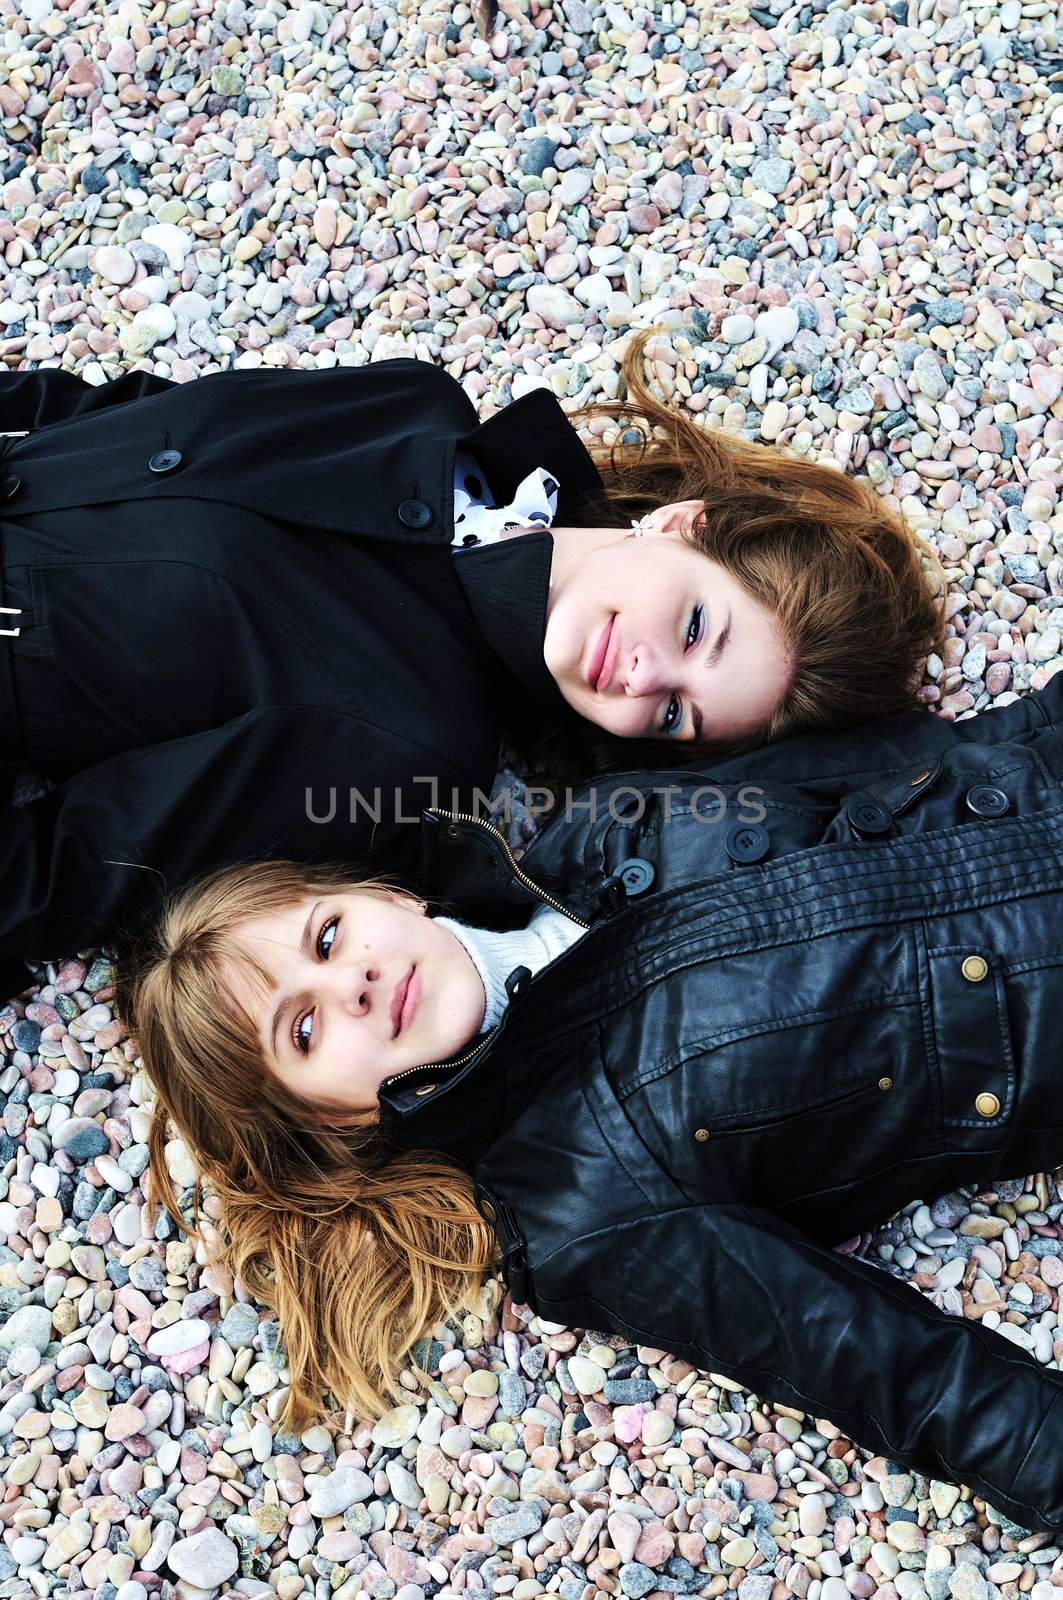 two teen girls laying on the pebble in spring time